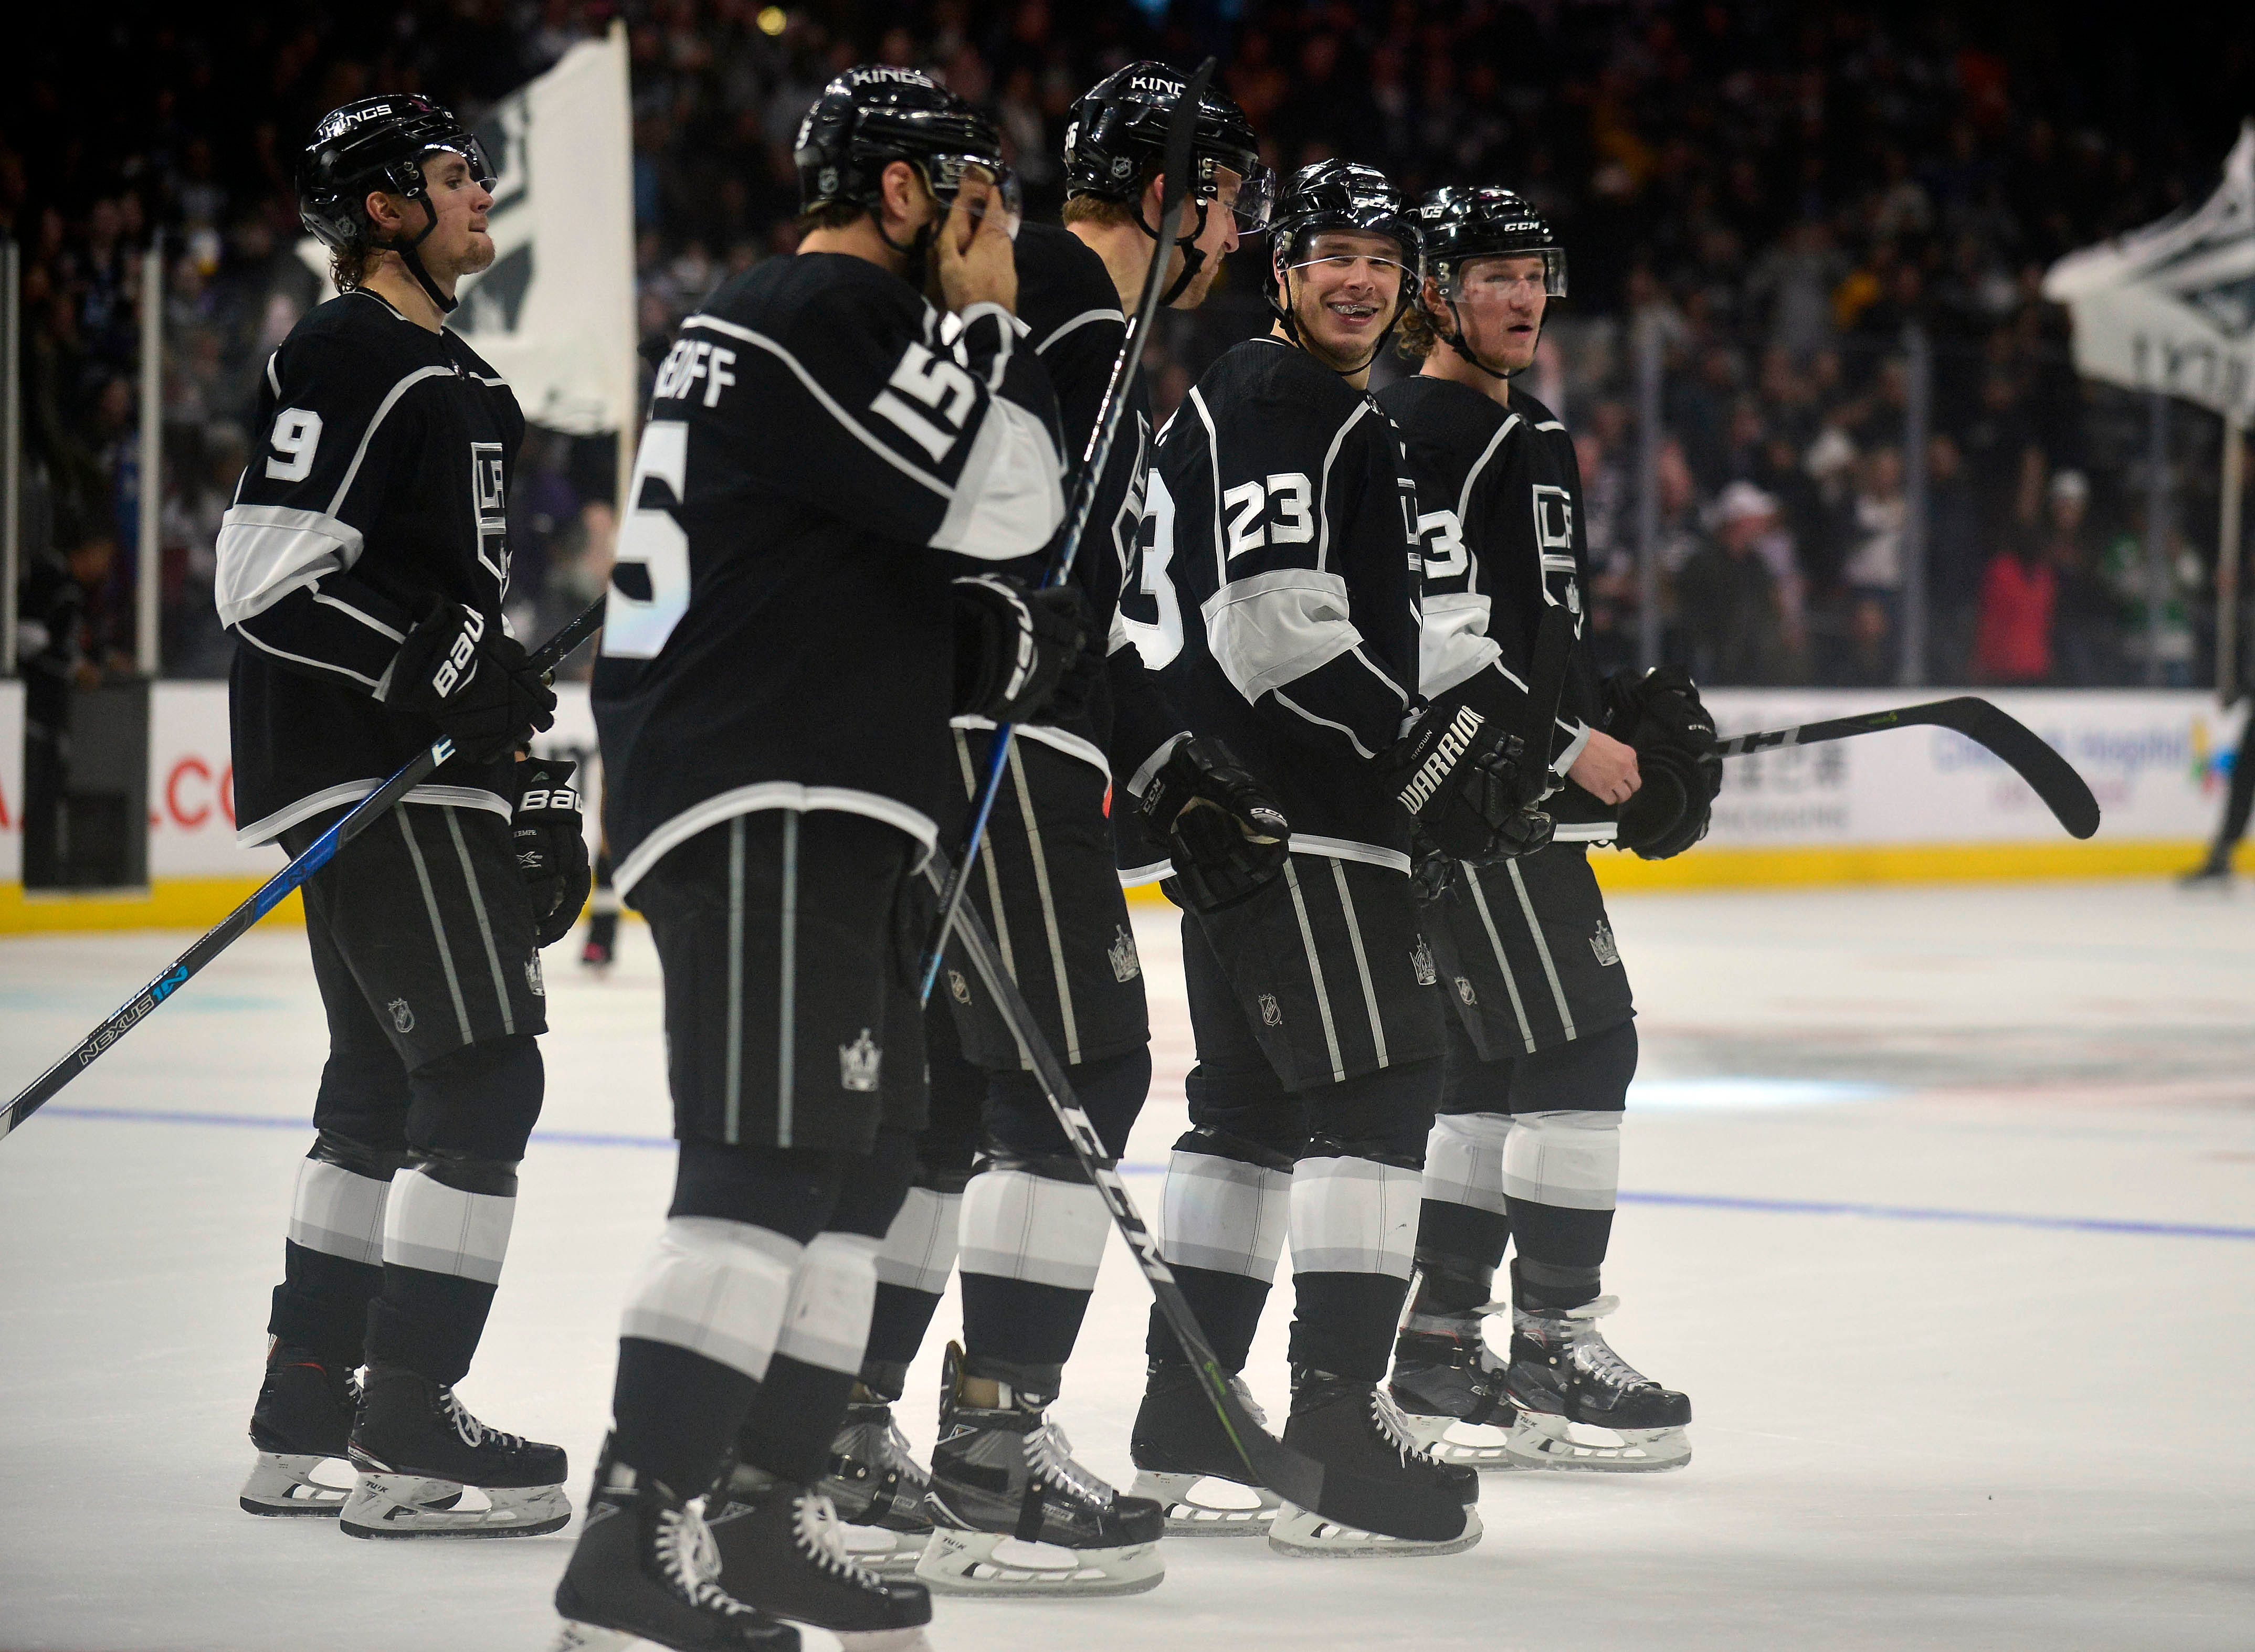 Dustin Brown ends 1,000th career game with overtime goal